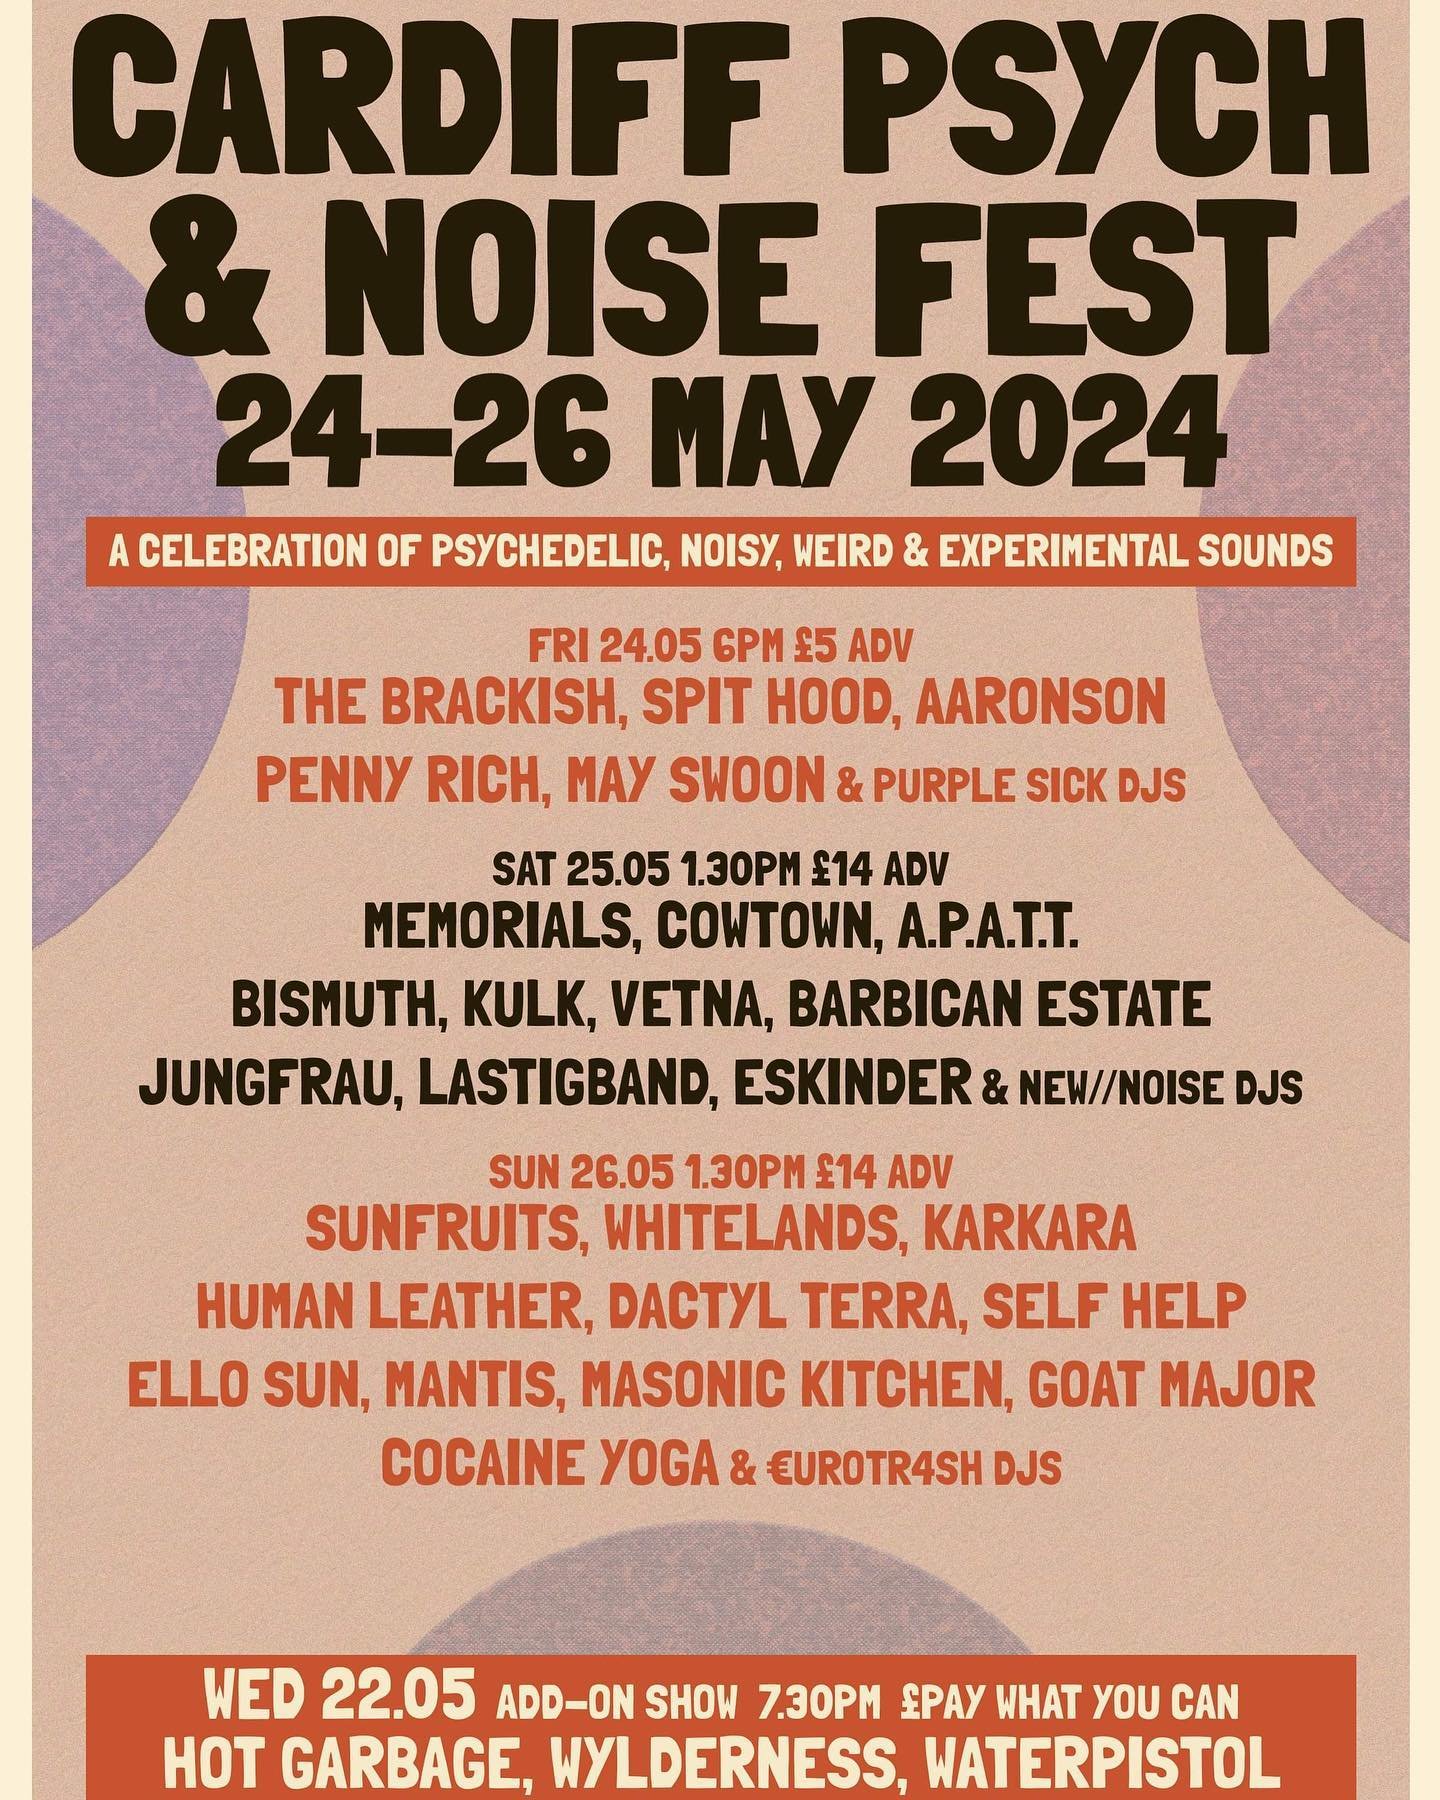 TICKET GIVEAWAY &amp; DAY SPLITS!
Cardiff Psych &amp; Noise Fest annual poster-sharing competition for 2 chances to win a pair of tickets (here + Facebook) - either a repost or story - make sure your profile is set to public so we can see, good luck!